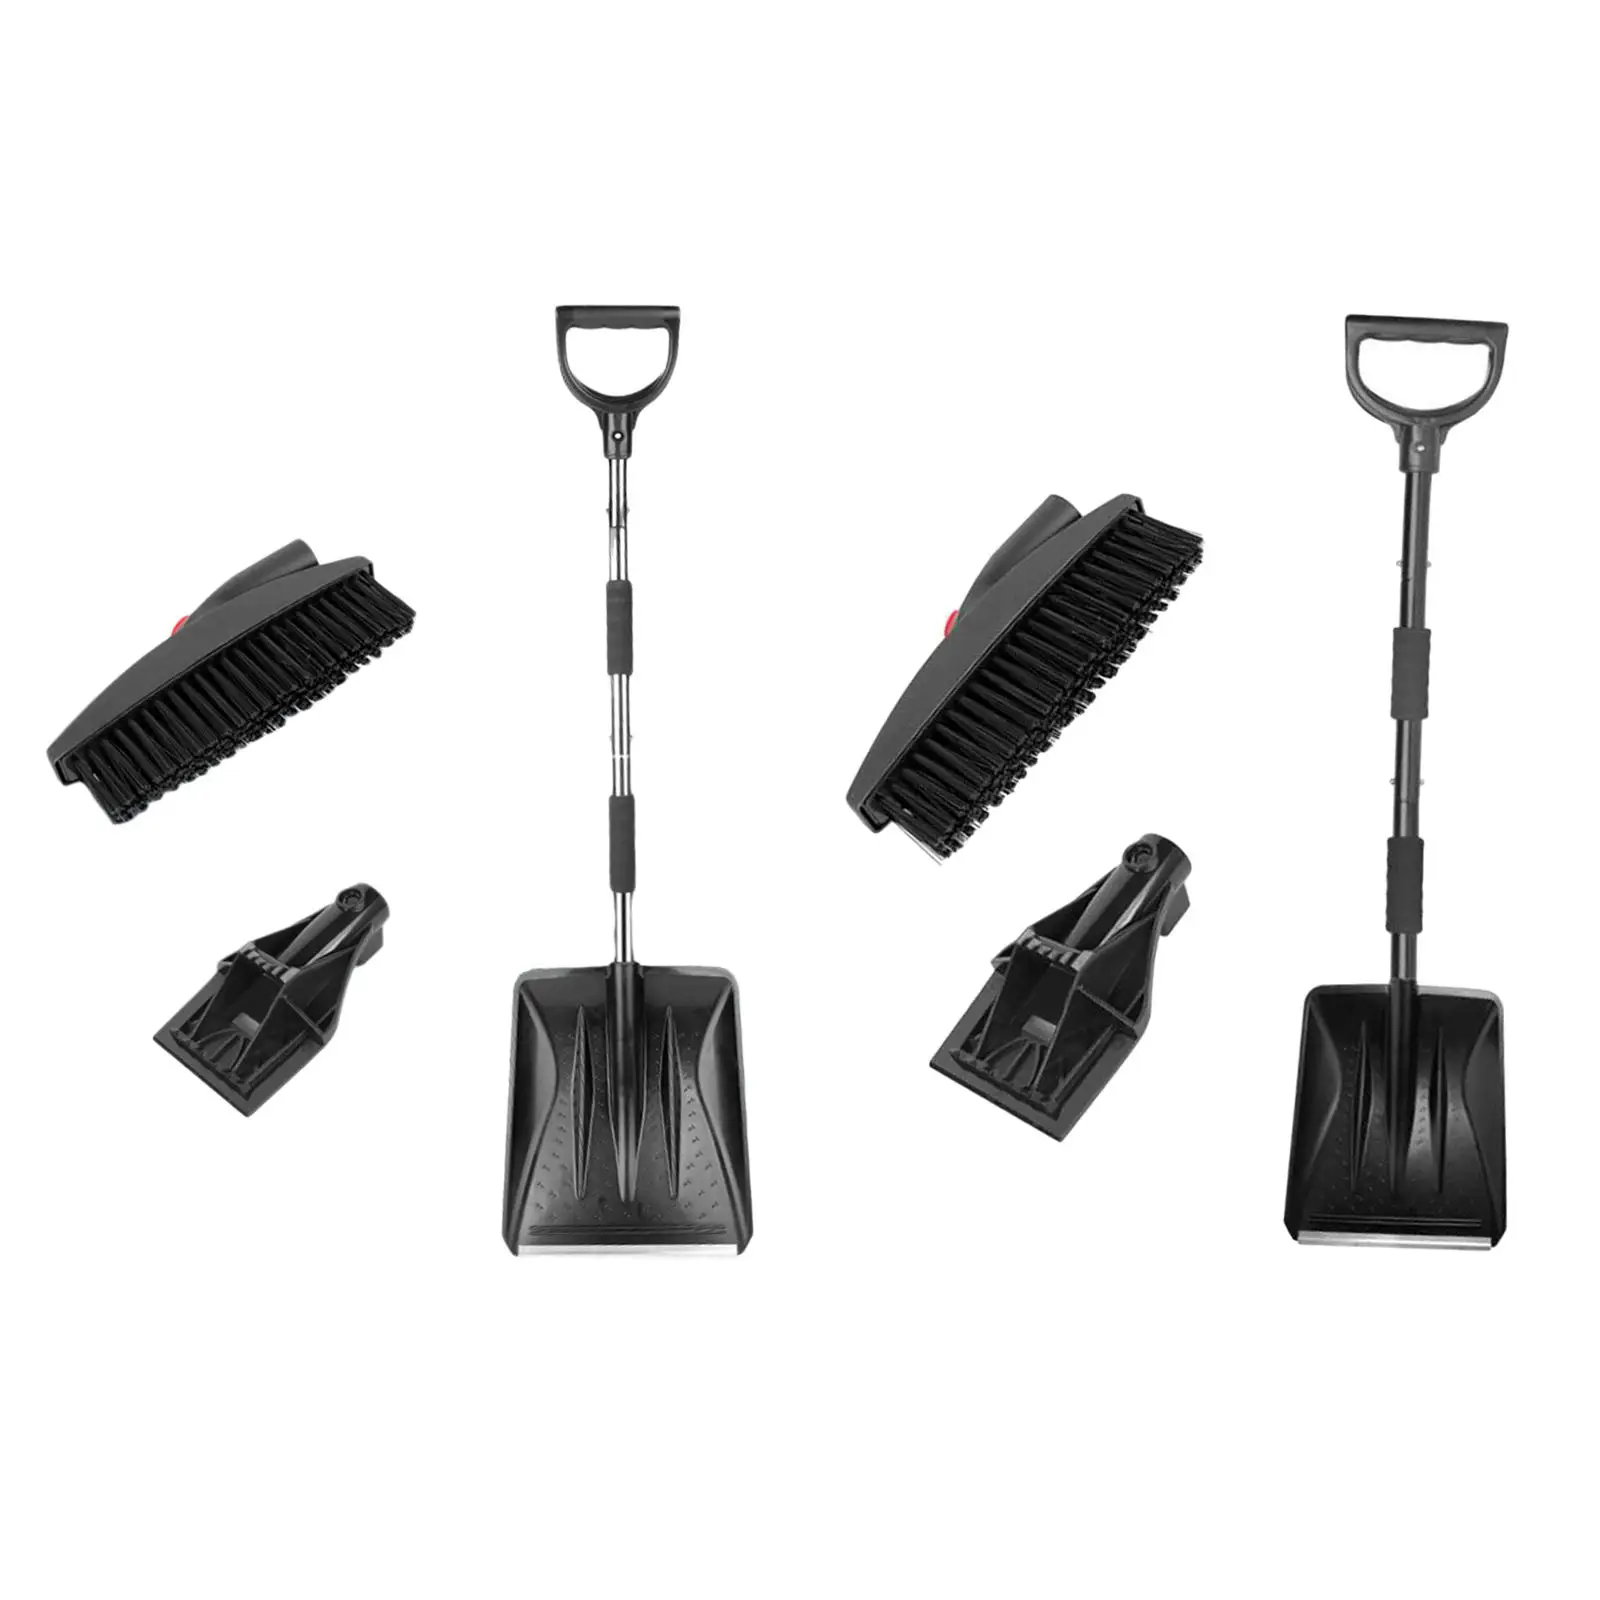 Snow Brush Scraper Snow Shovel for Car Snow Cleaner for Outdoor Winter Auto